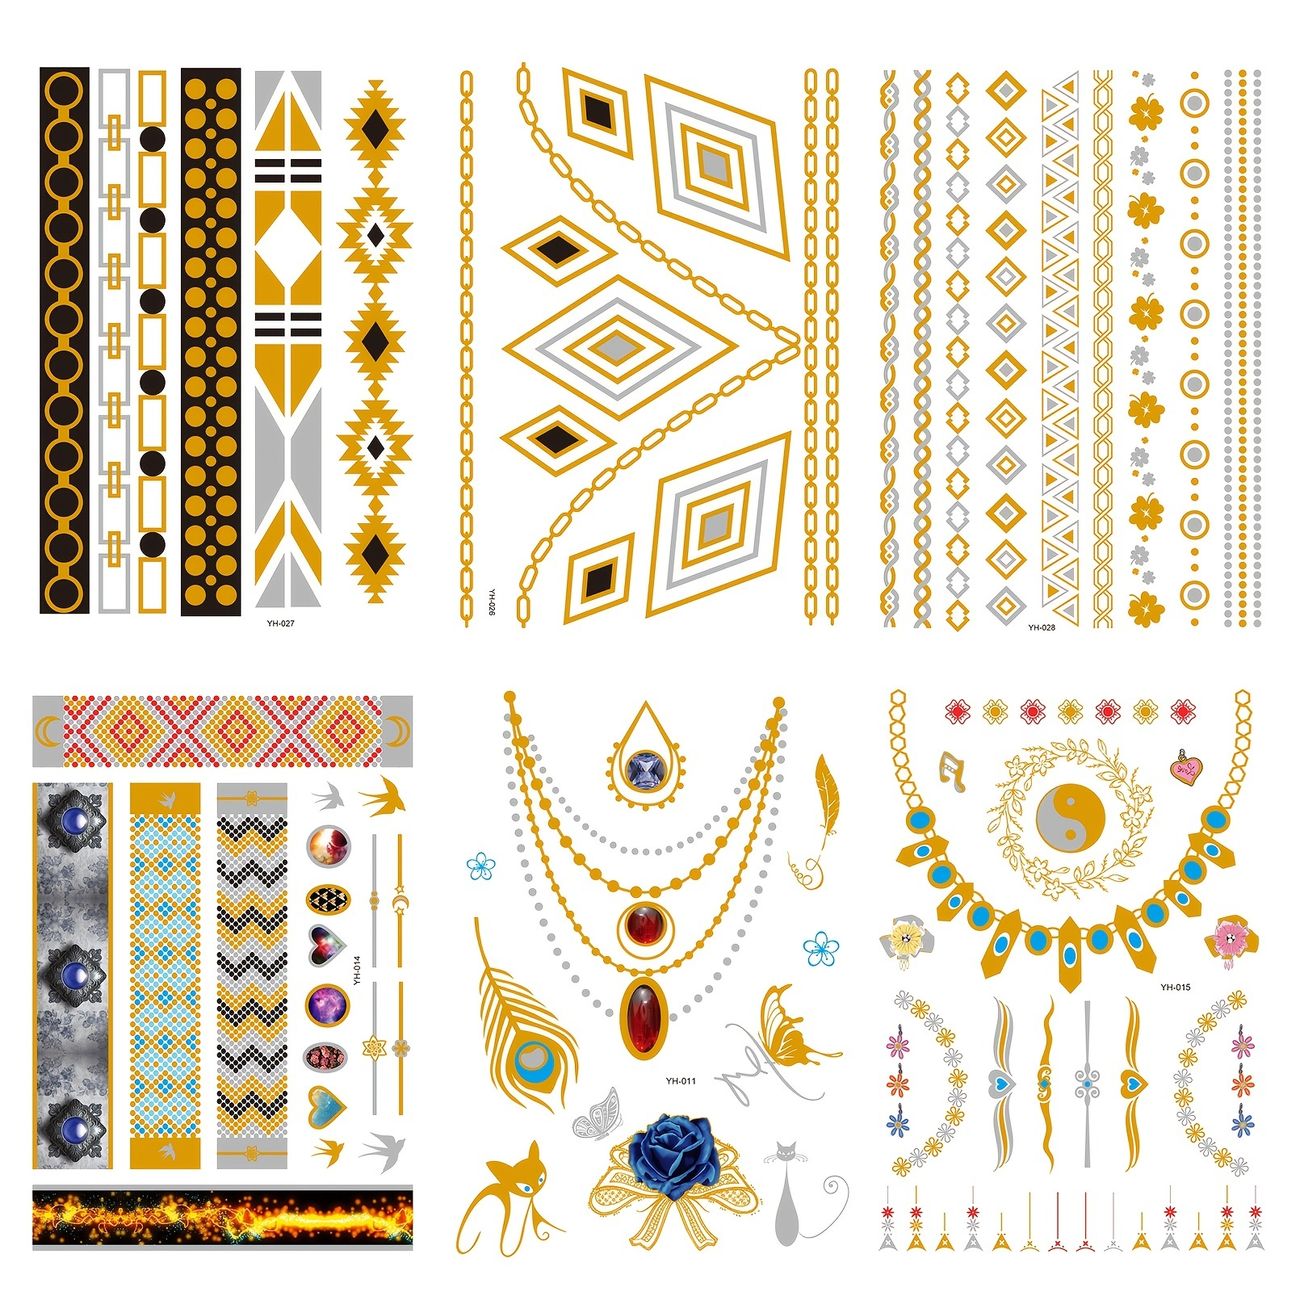 Metallic Temporary Tattoo Gold Silver Geometry Gems And Flowers Pattern Fake  Tattoos Flash Jewelry Tattoos Waterproof And Long Lasting Boho Style Tattoos  For Women And Girls | Free Shipping For New Users |